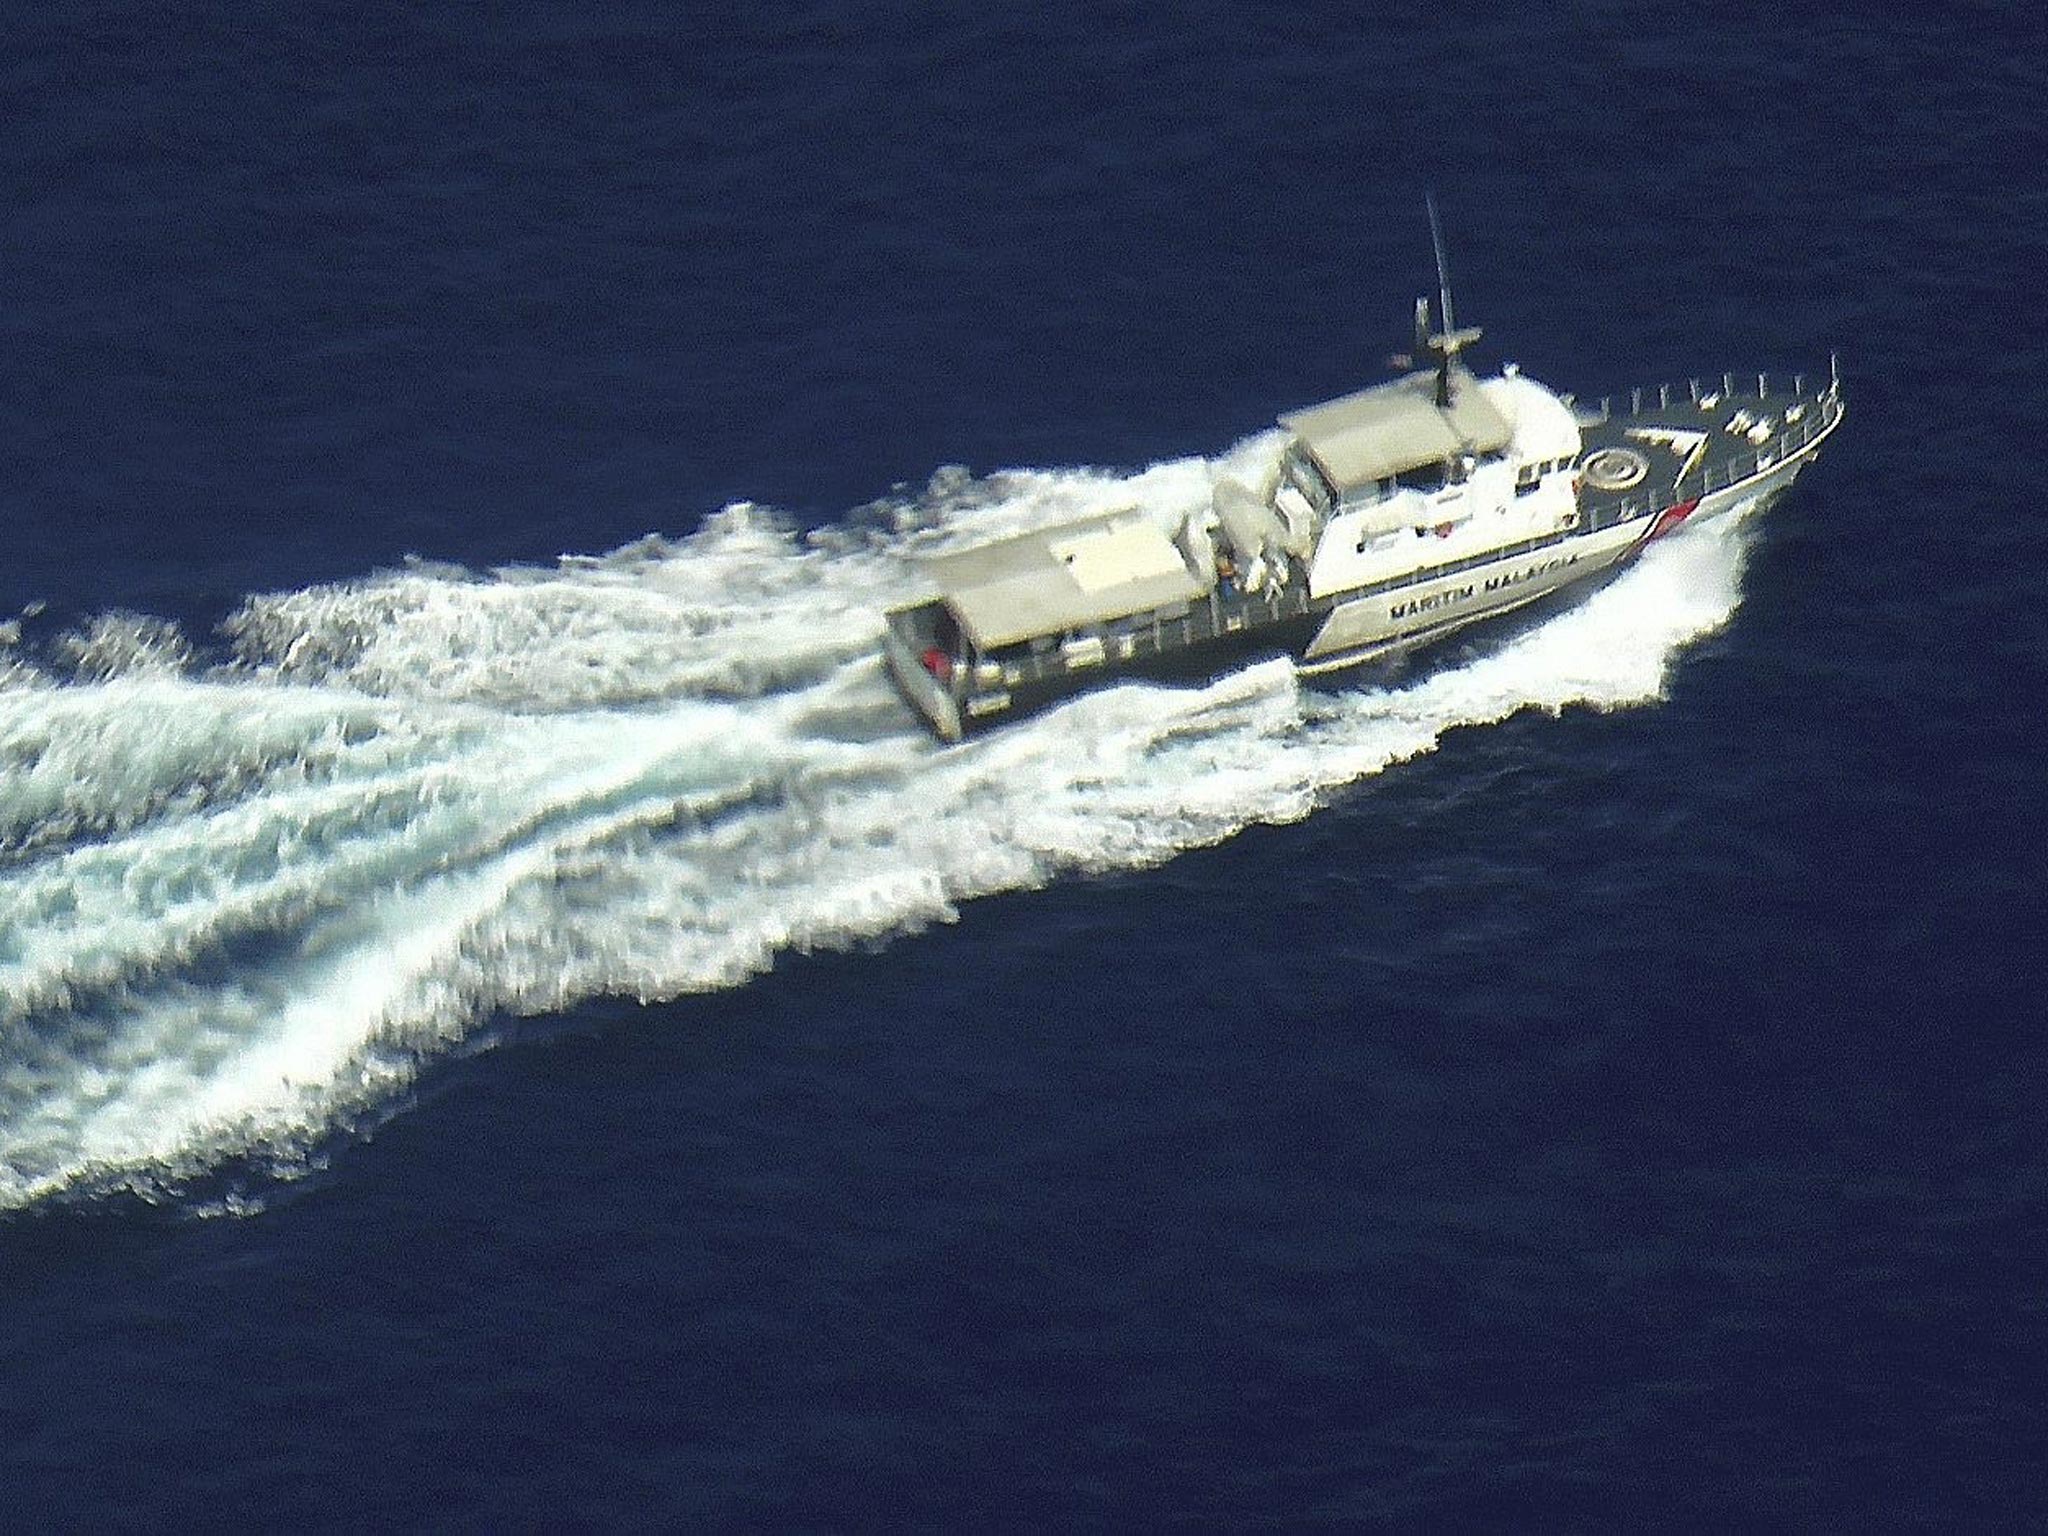 Malaysian coast guard ship during search and rescue operations for a missing Malaysian Airlines flight off the coast of Malaysia